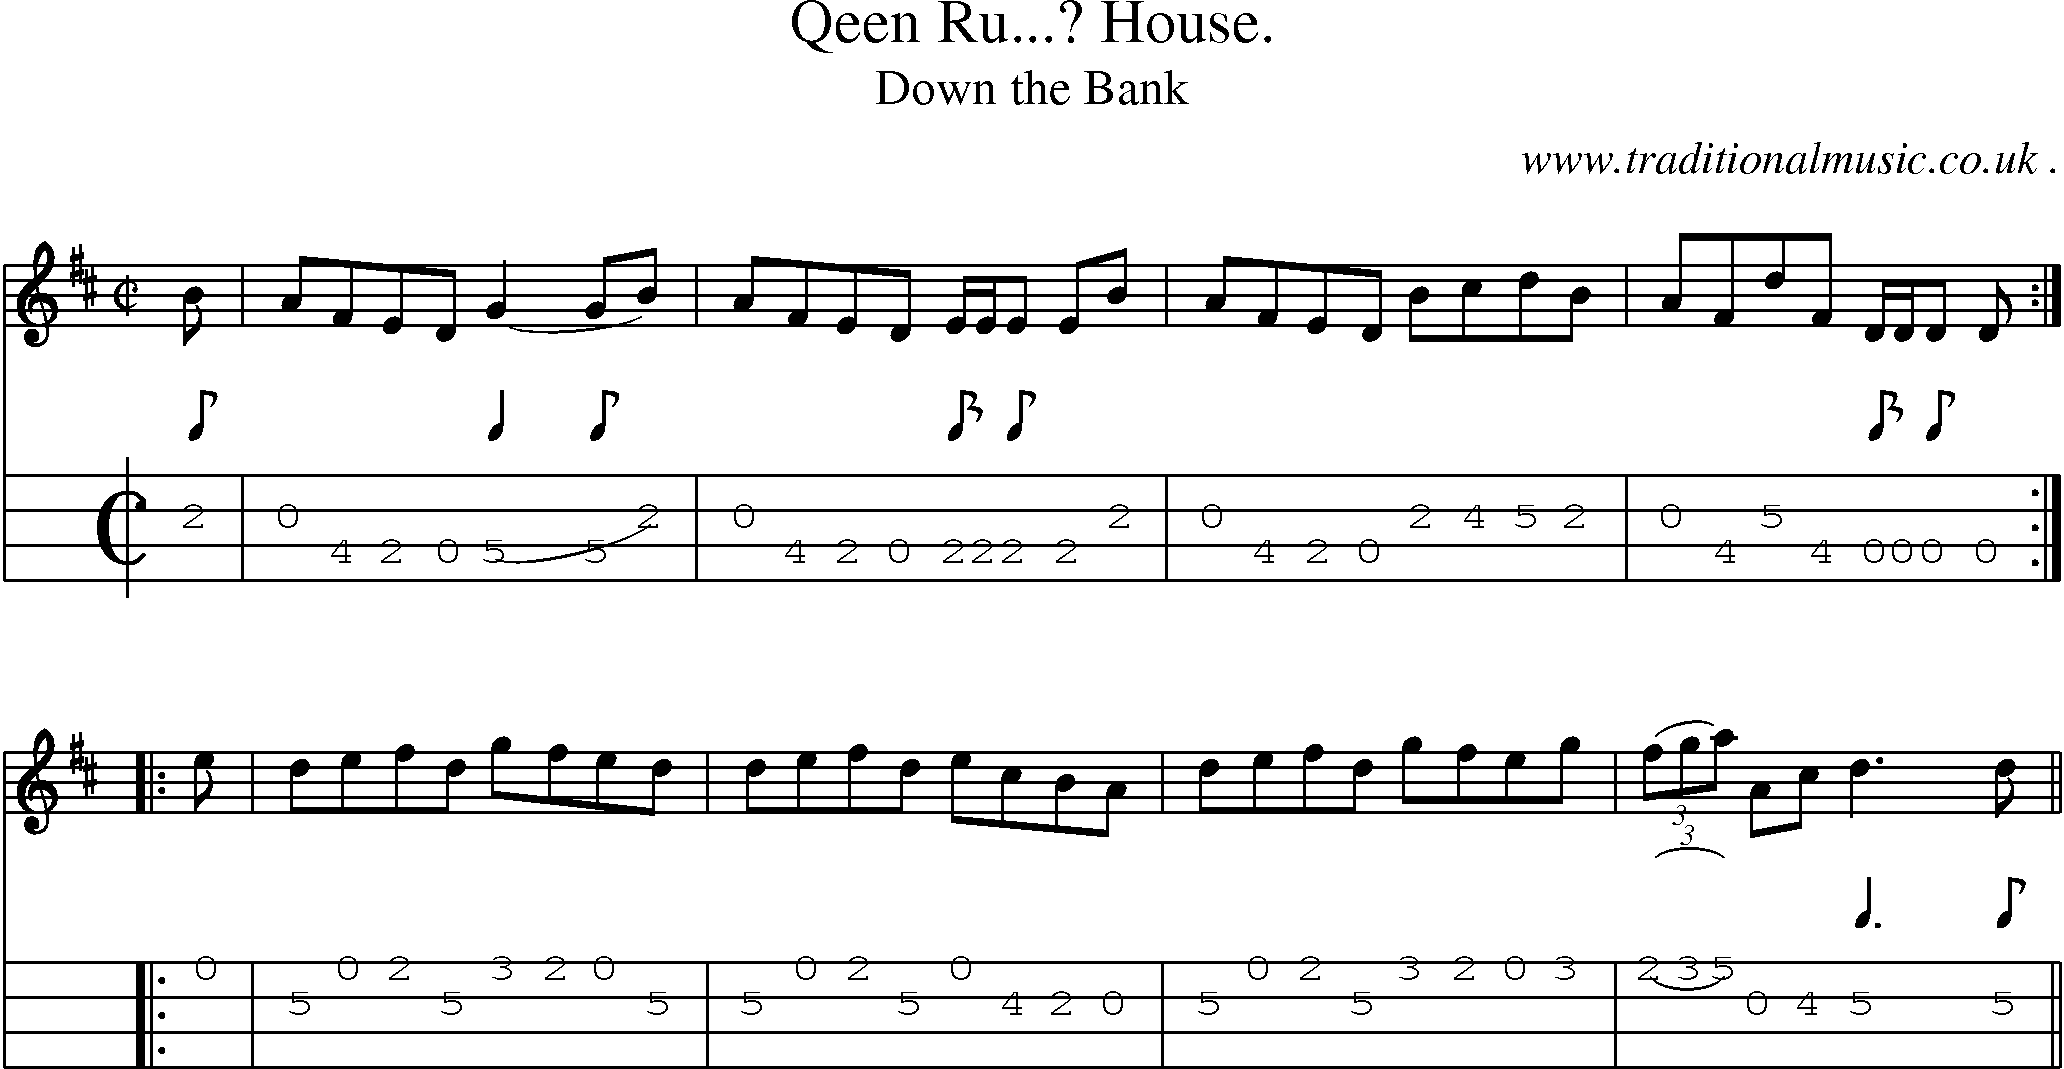 Sheet-Music and Mandolin Tabs for Qeen Ru House